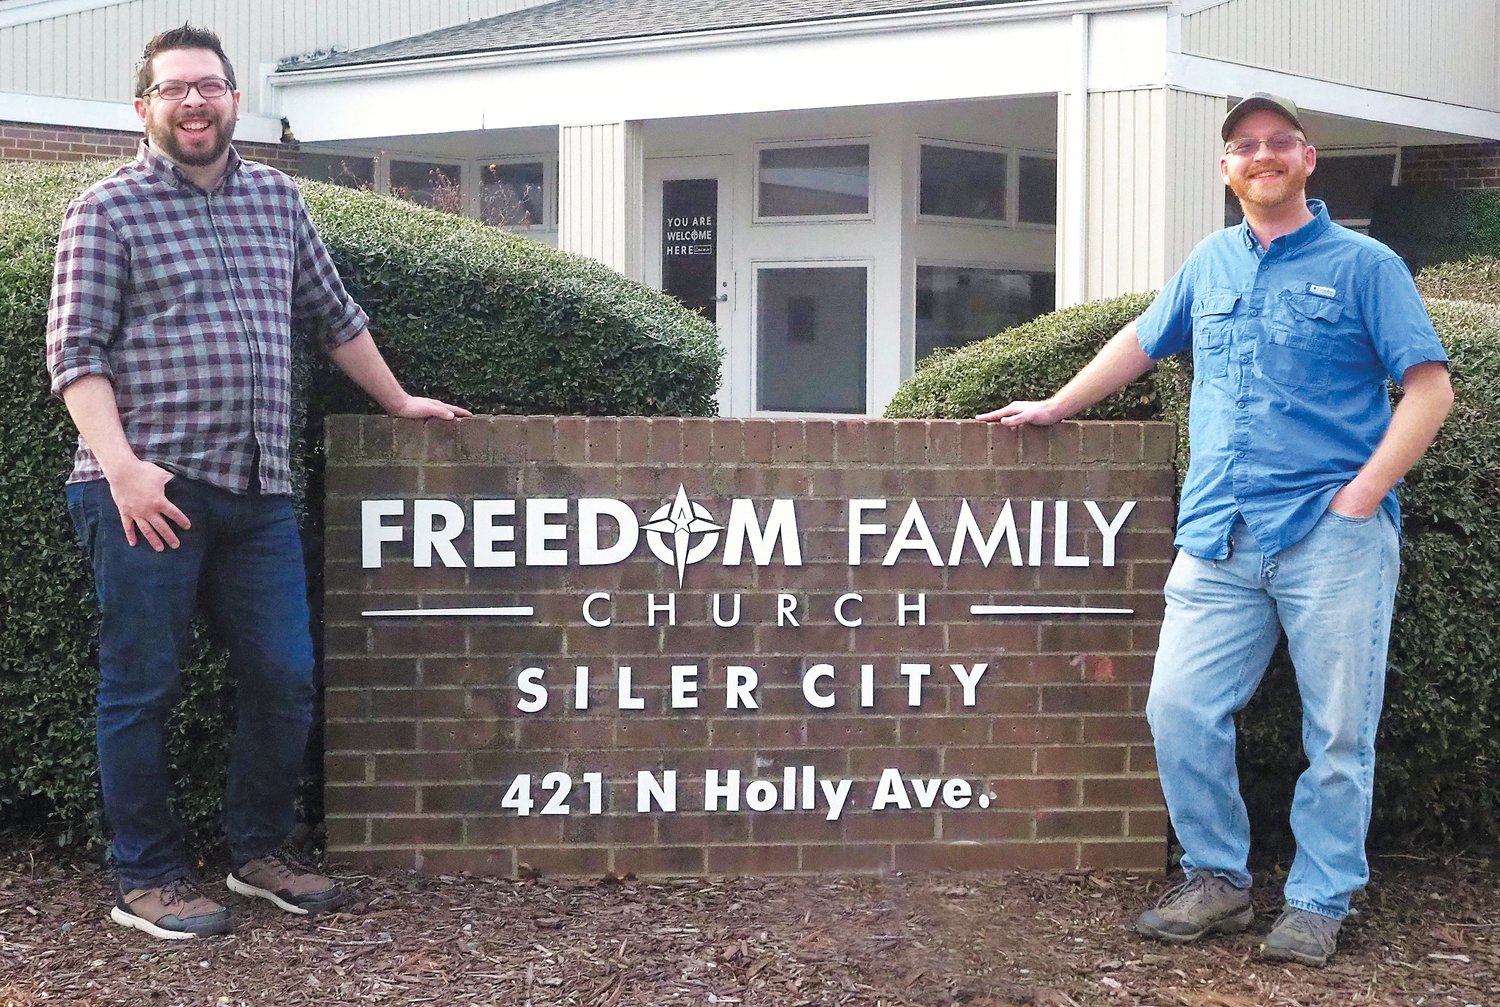 Love Chatham's executive director, Dakota Philbrick (right), stands outside Freedom Family Church in Siler City with the church's pastor, Ben Suggs, who's also a founding member of Love Chatham.